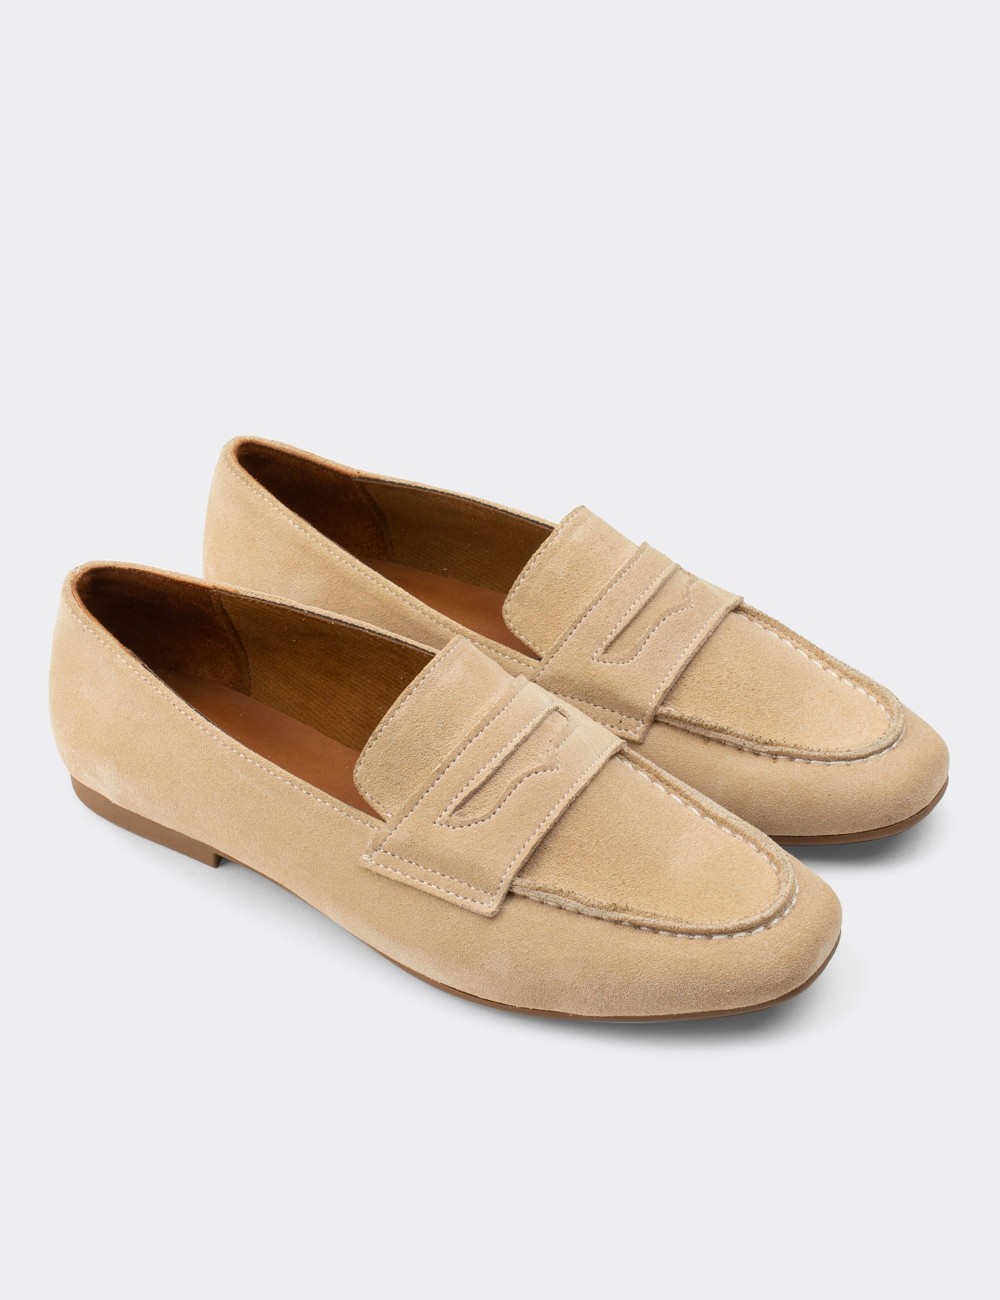 Beige Suede Leather Loafers - 01914ZBEJC01